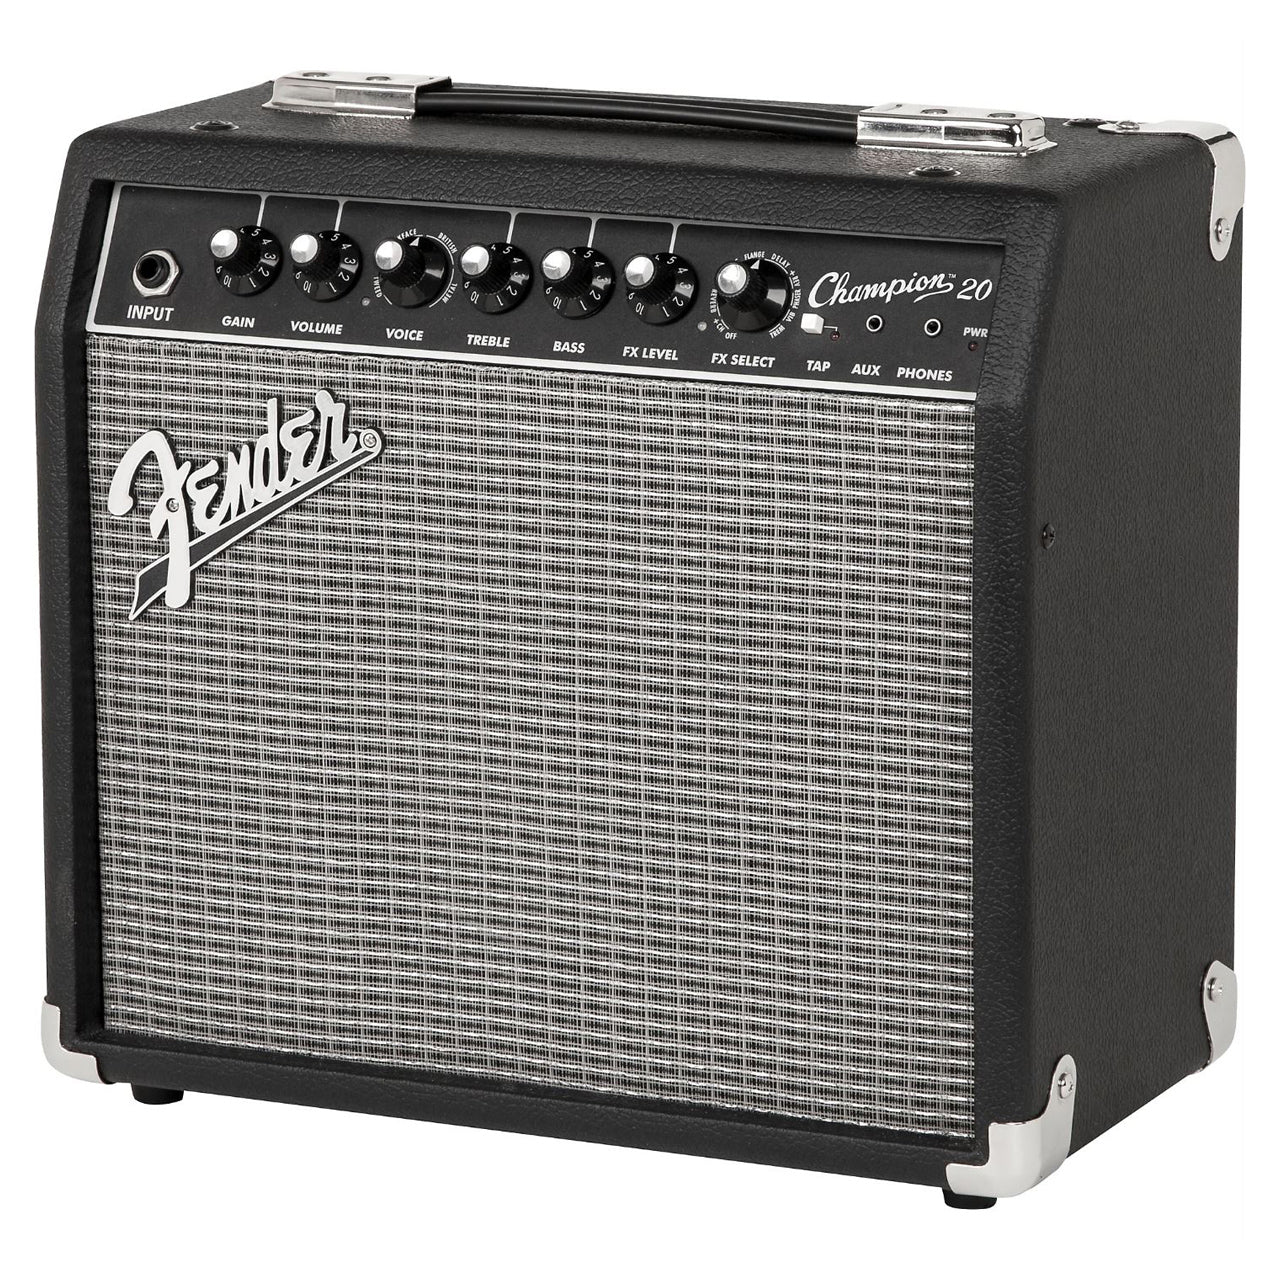 Fender Champion 20 20-Watt 1x8" Guitar Combo Amplifier with Onboard Effects, AUX In, Headphone Output for Electric Guitars